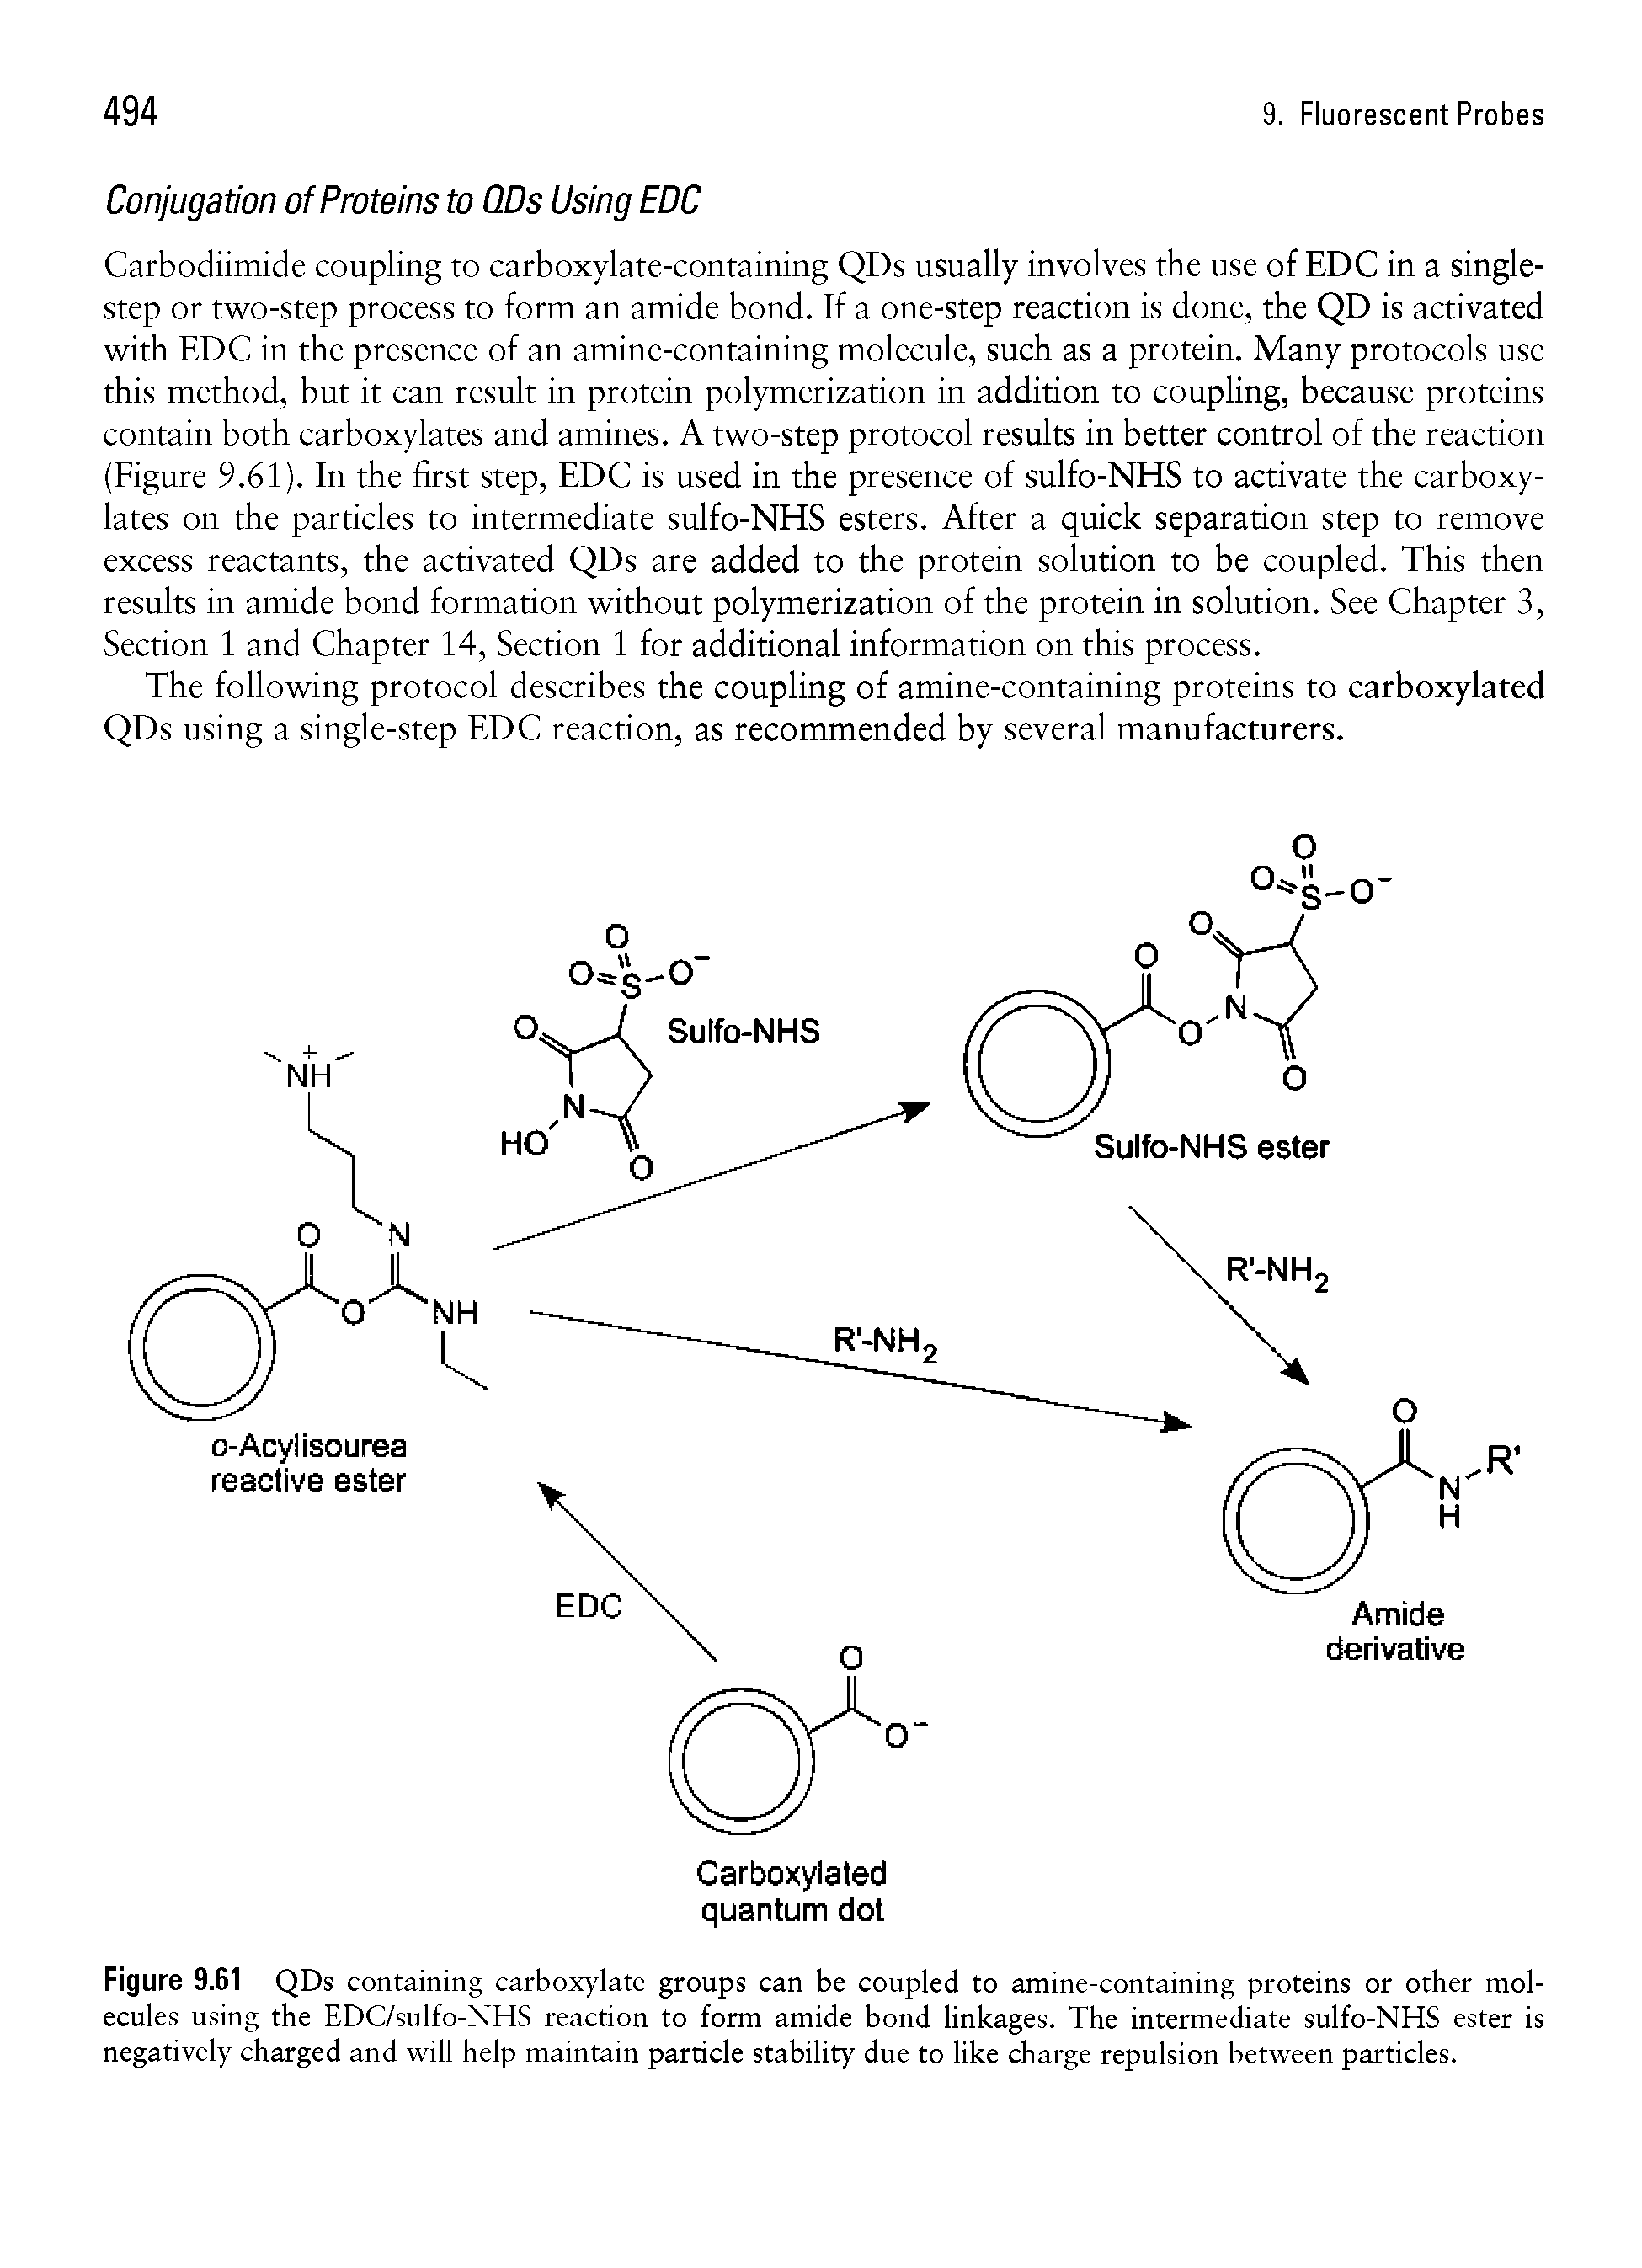 Figure 9.61 QDs containing carboxylate groups can be coupled to amine-containing proteins or other molecules using the EDC/sulfo-NHS reaction to form amide bond linkages. The intermediate sulfo-NHS ester is negatively charged and will help maintain particle stability due to like charge repulsion between particles.